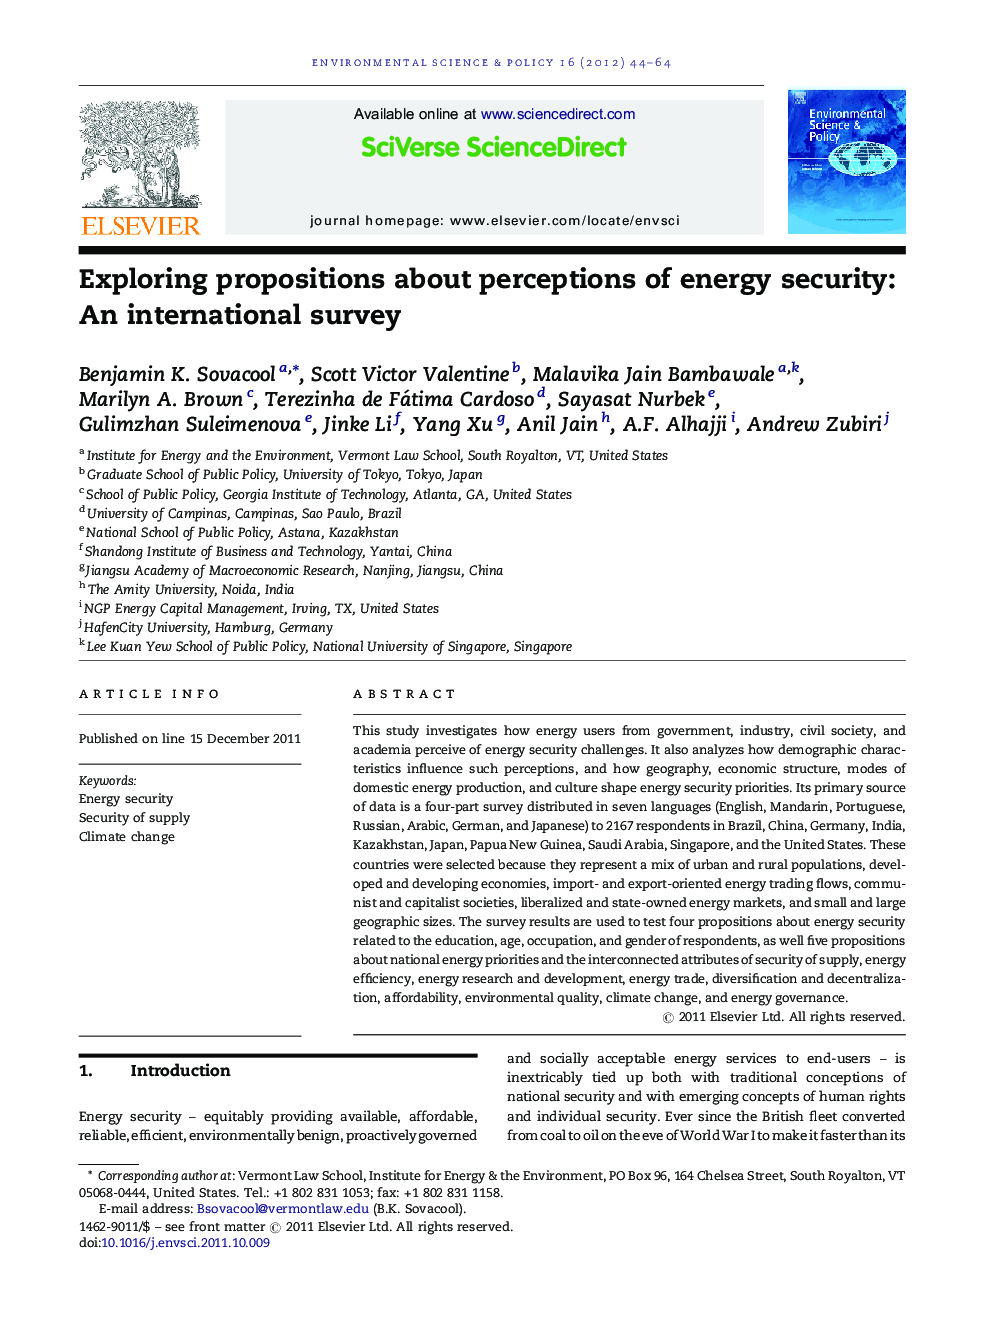 Exploring propositions about perceptions of energy security: An international survey